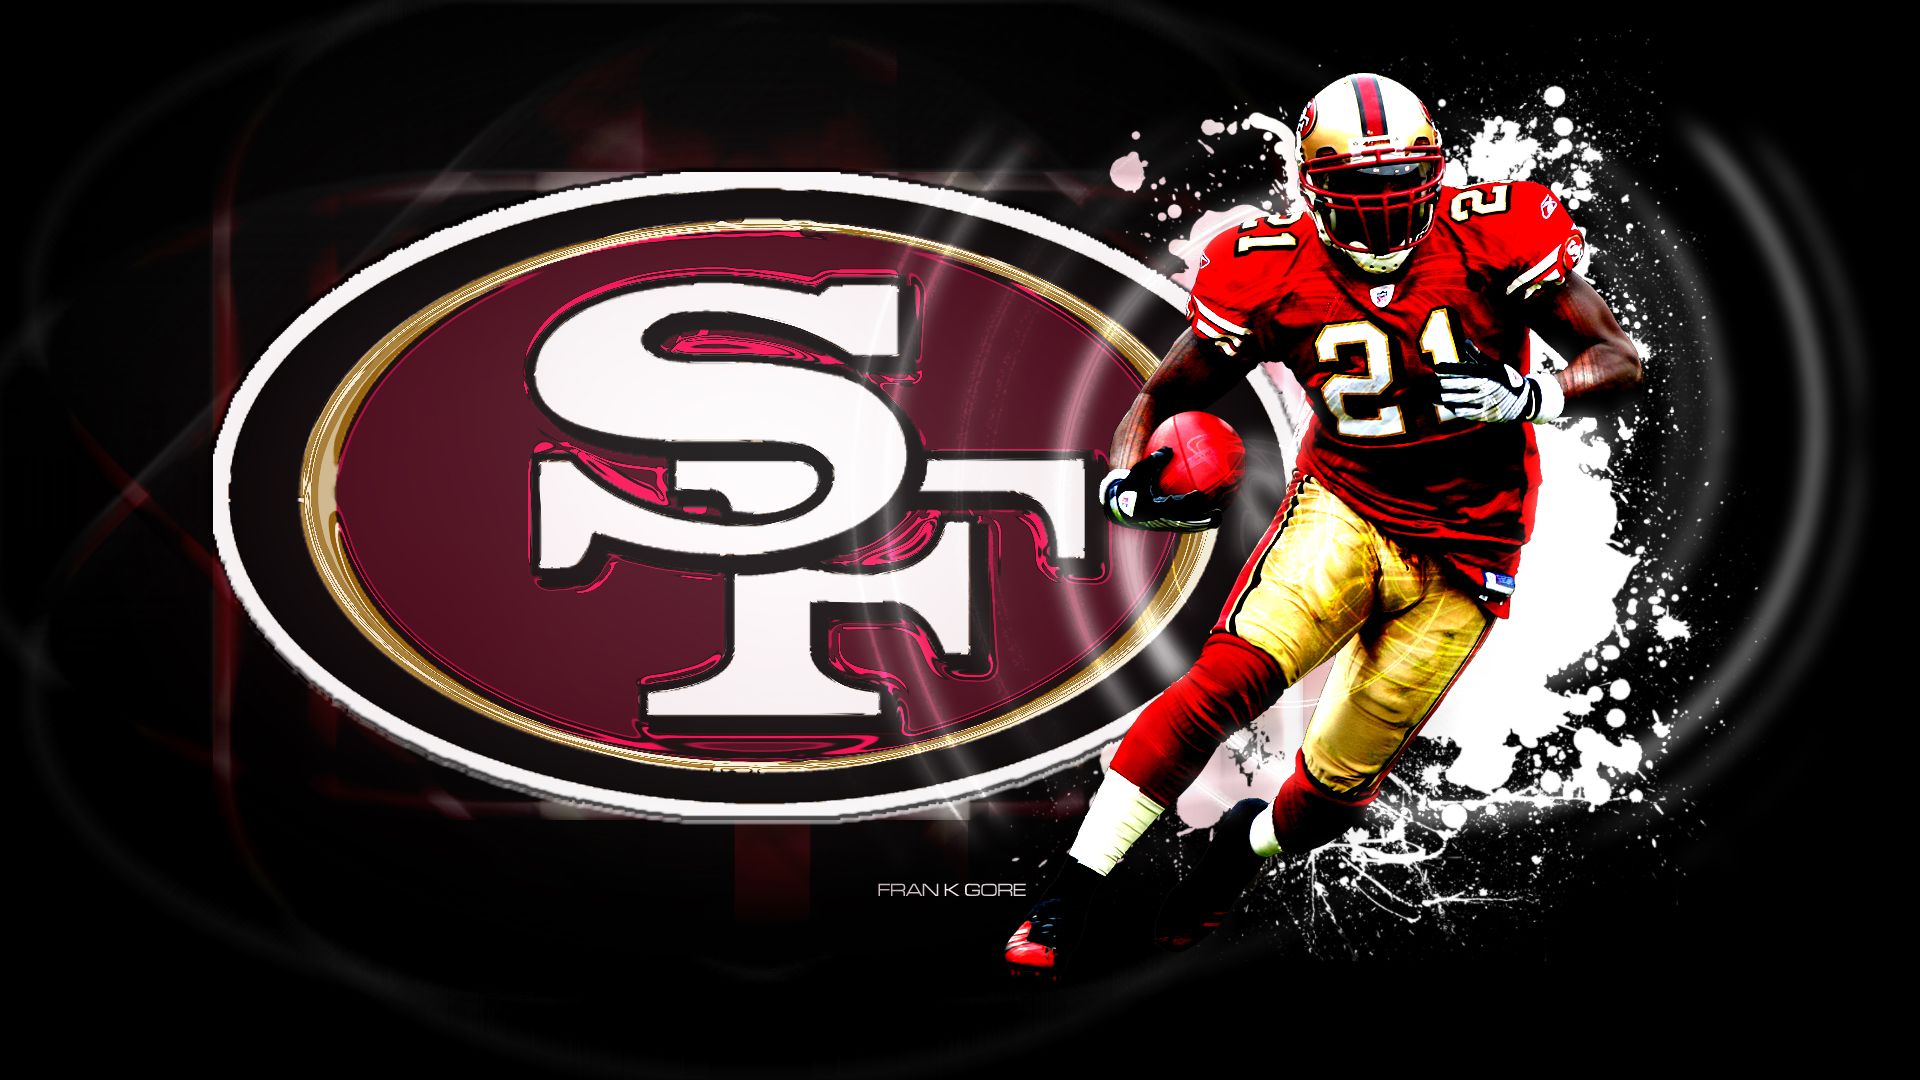 49ers images cute Backgrounds